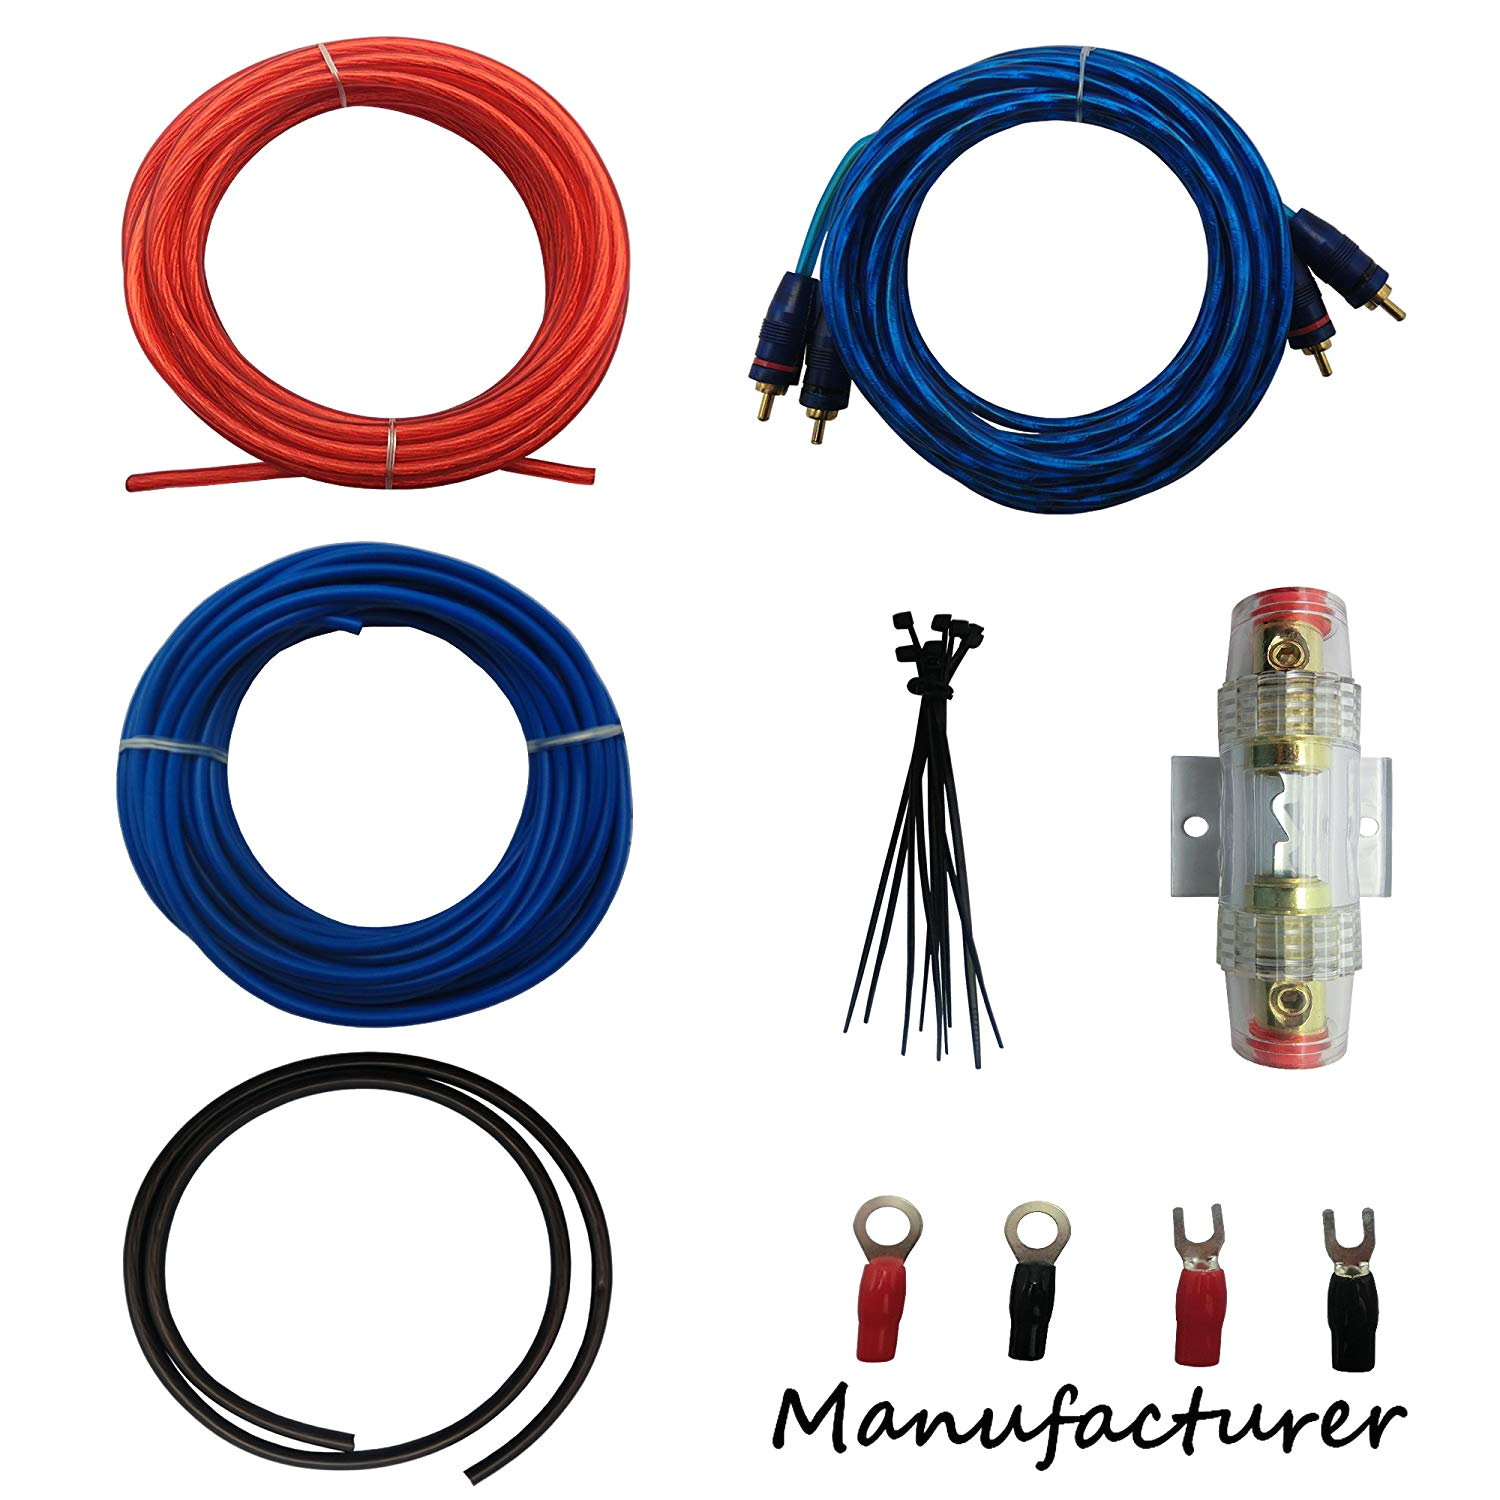 amazon com 10 gauge amp kit amplifier install wiring complete 10 ga installation cables 600w automotive